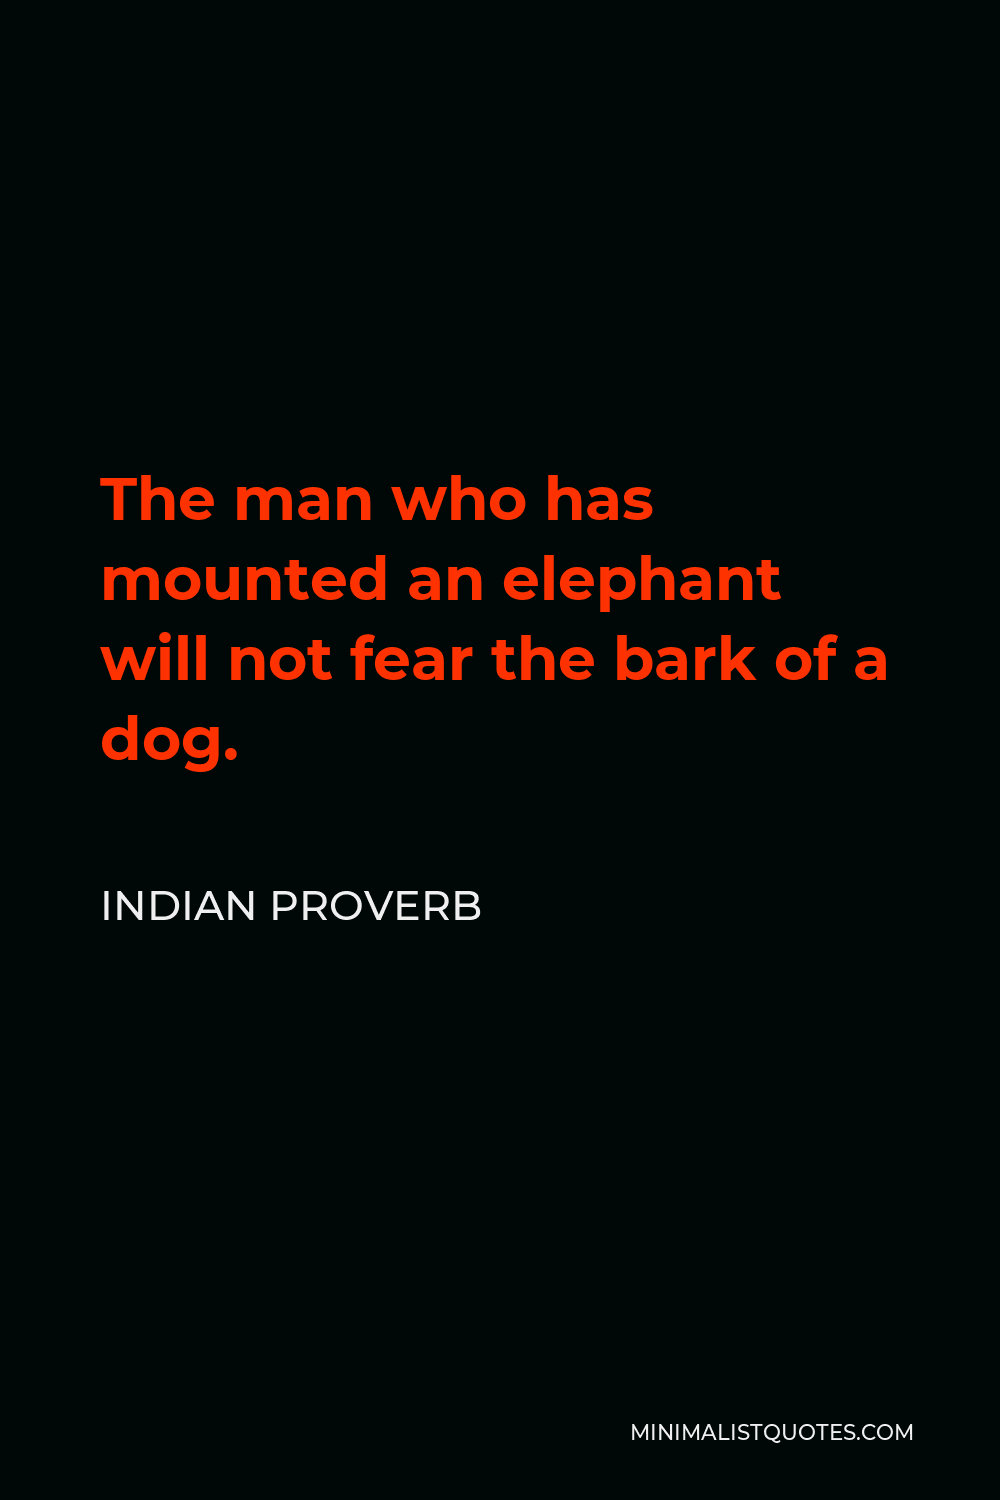 Indian Proverb Quote - The man who has mounted an elephant will not fear the bark of a dog.